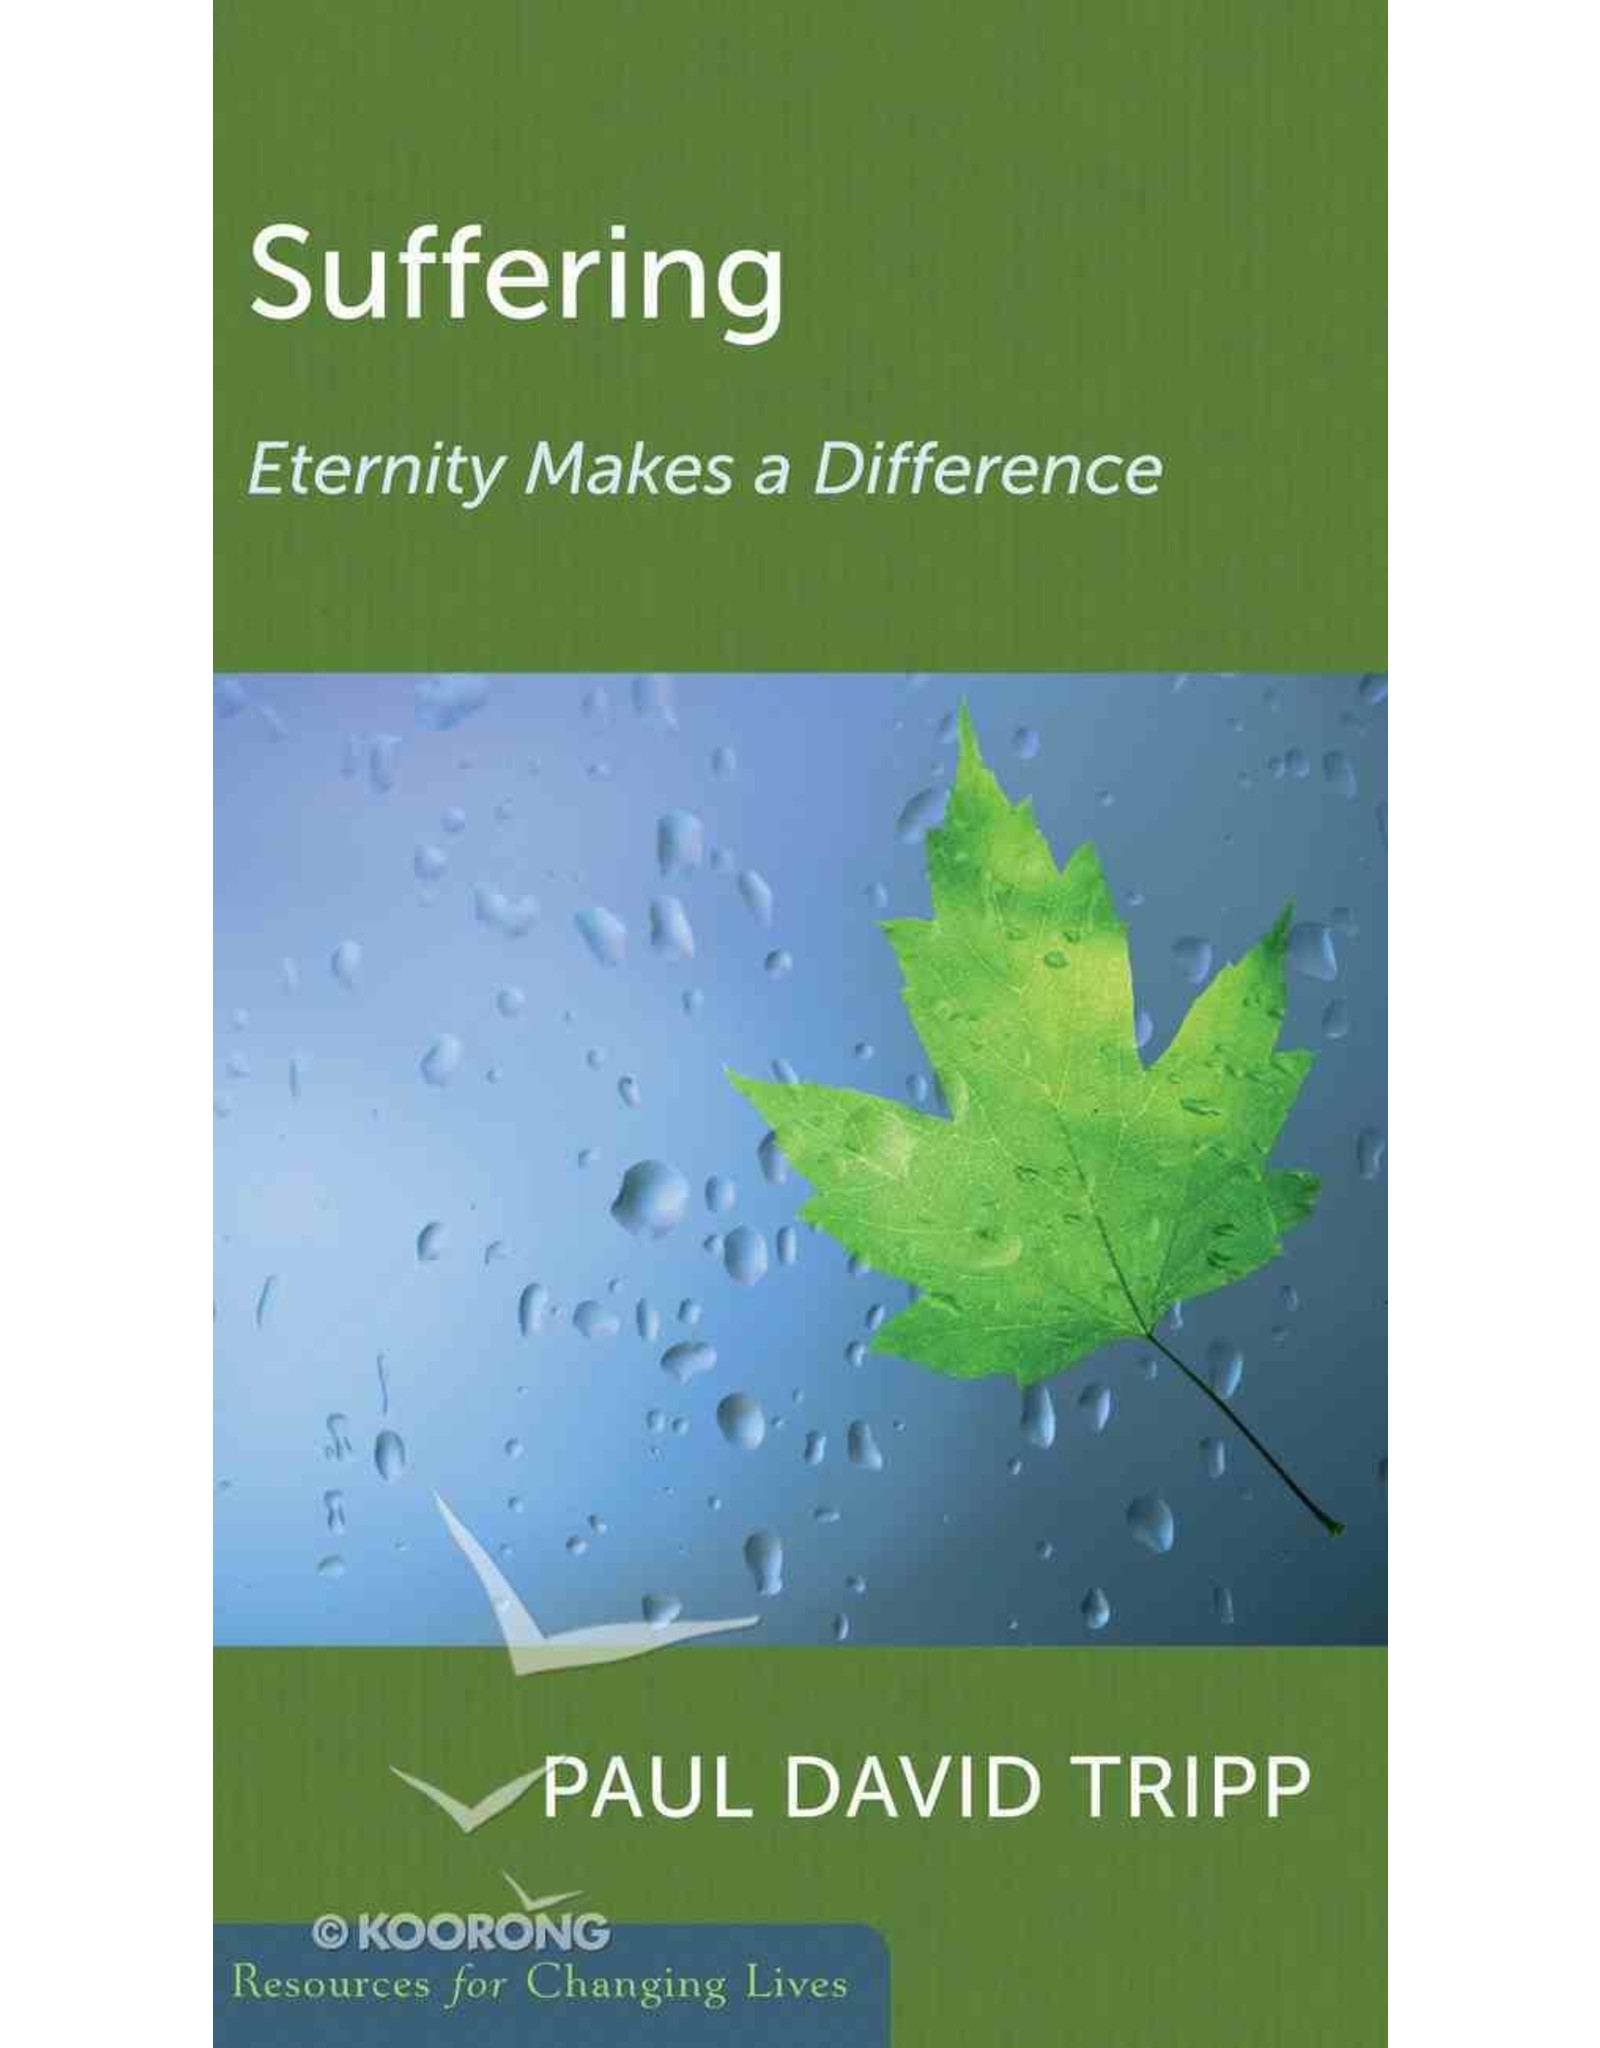 Suffering: Eternity makes a difference